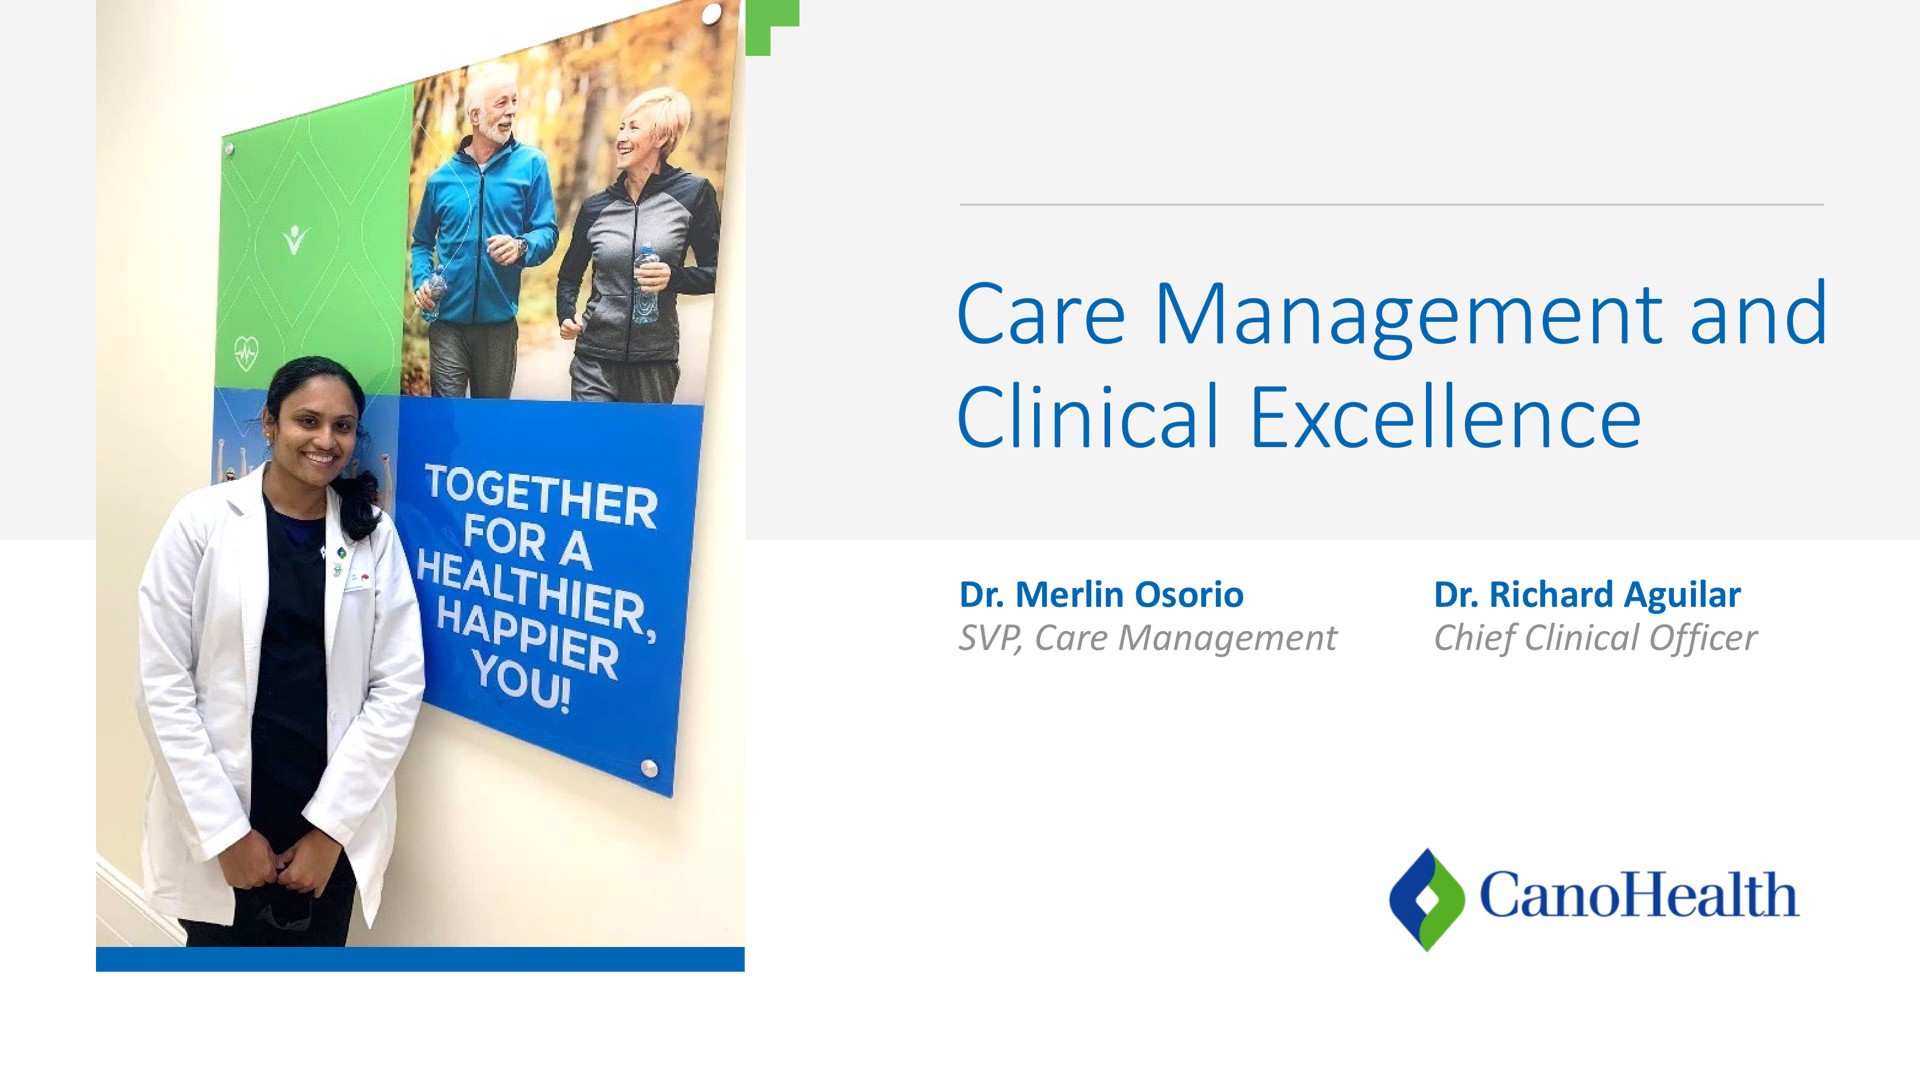 care management and clinical excellence | Cano Health